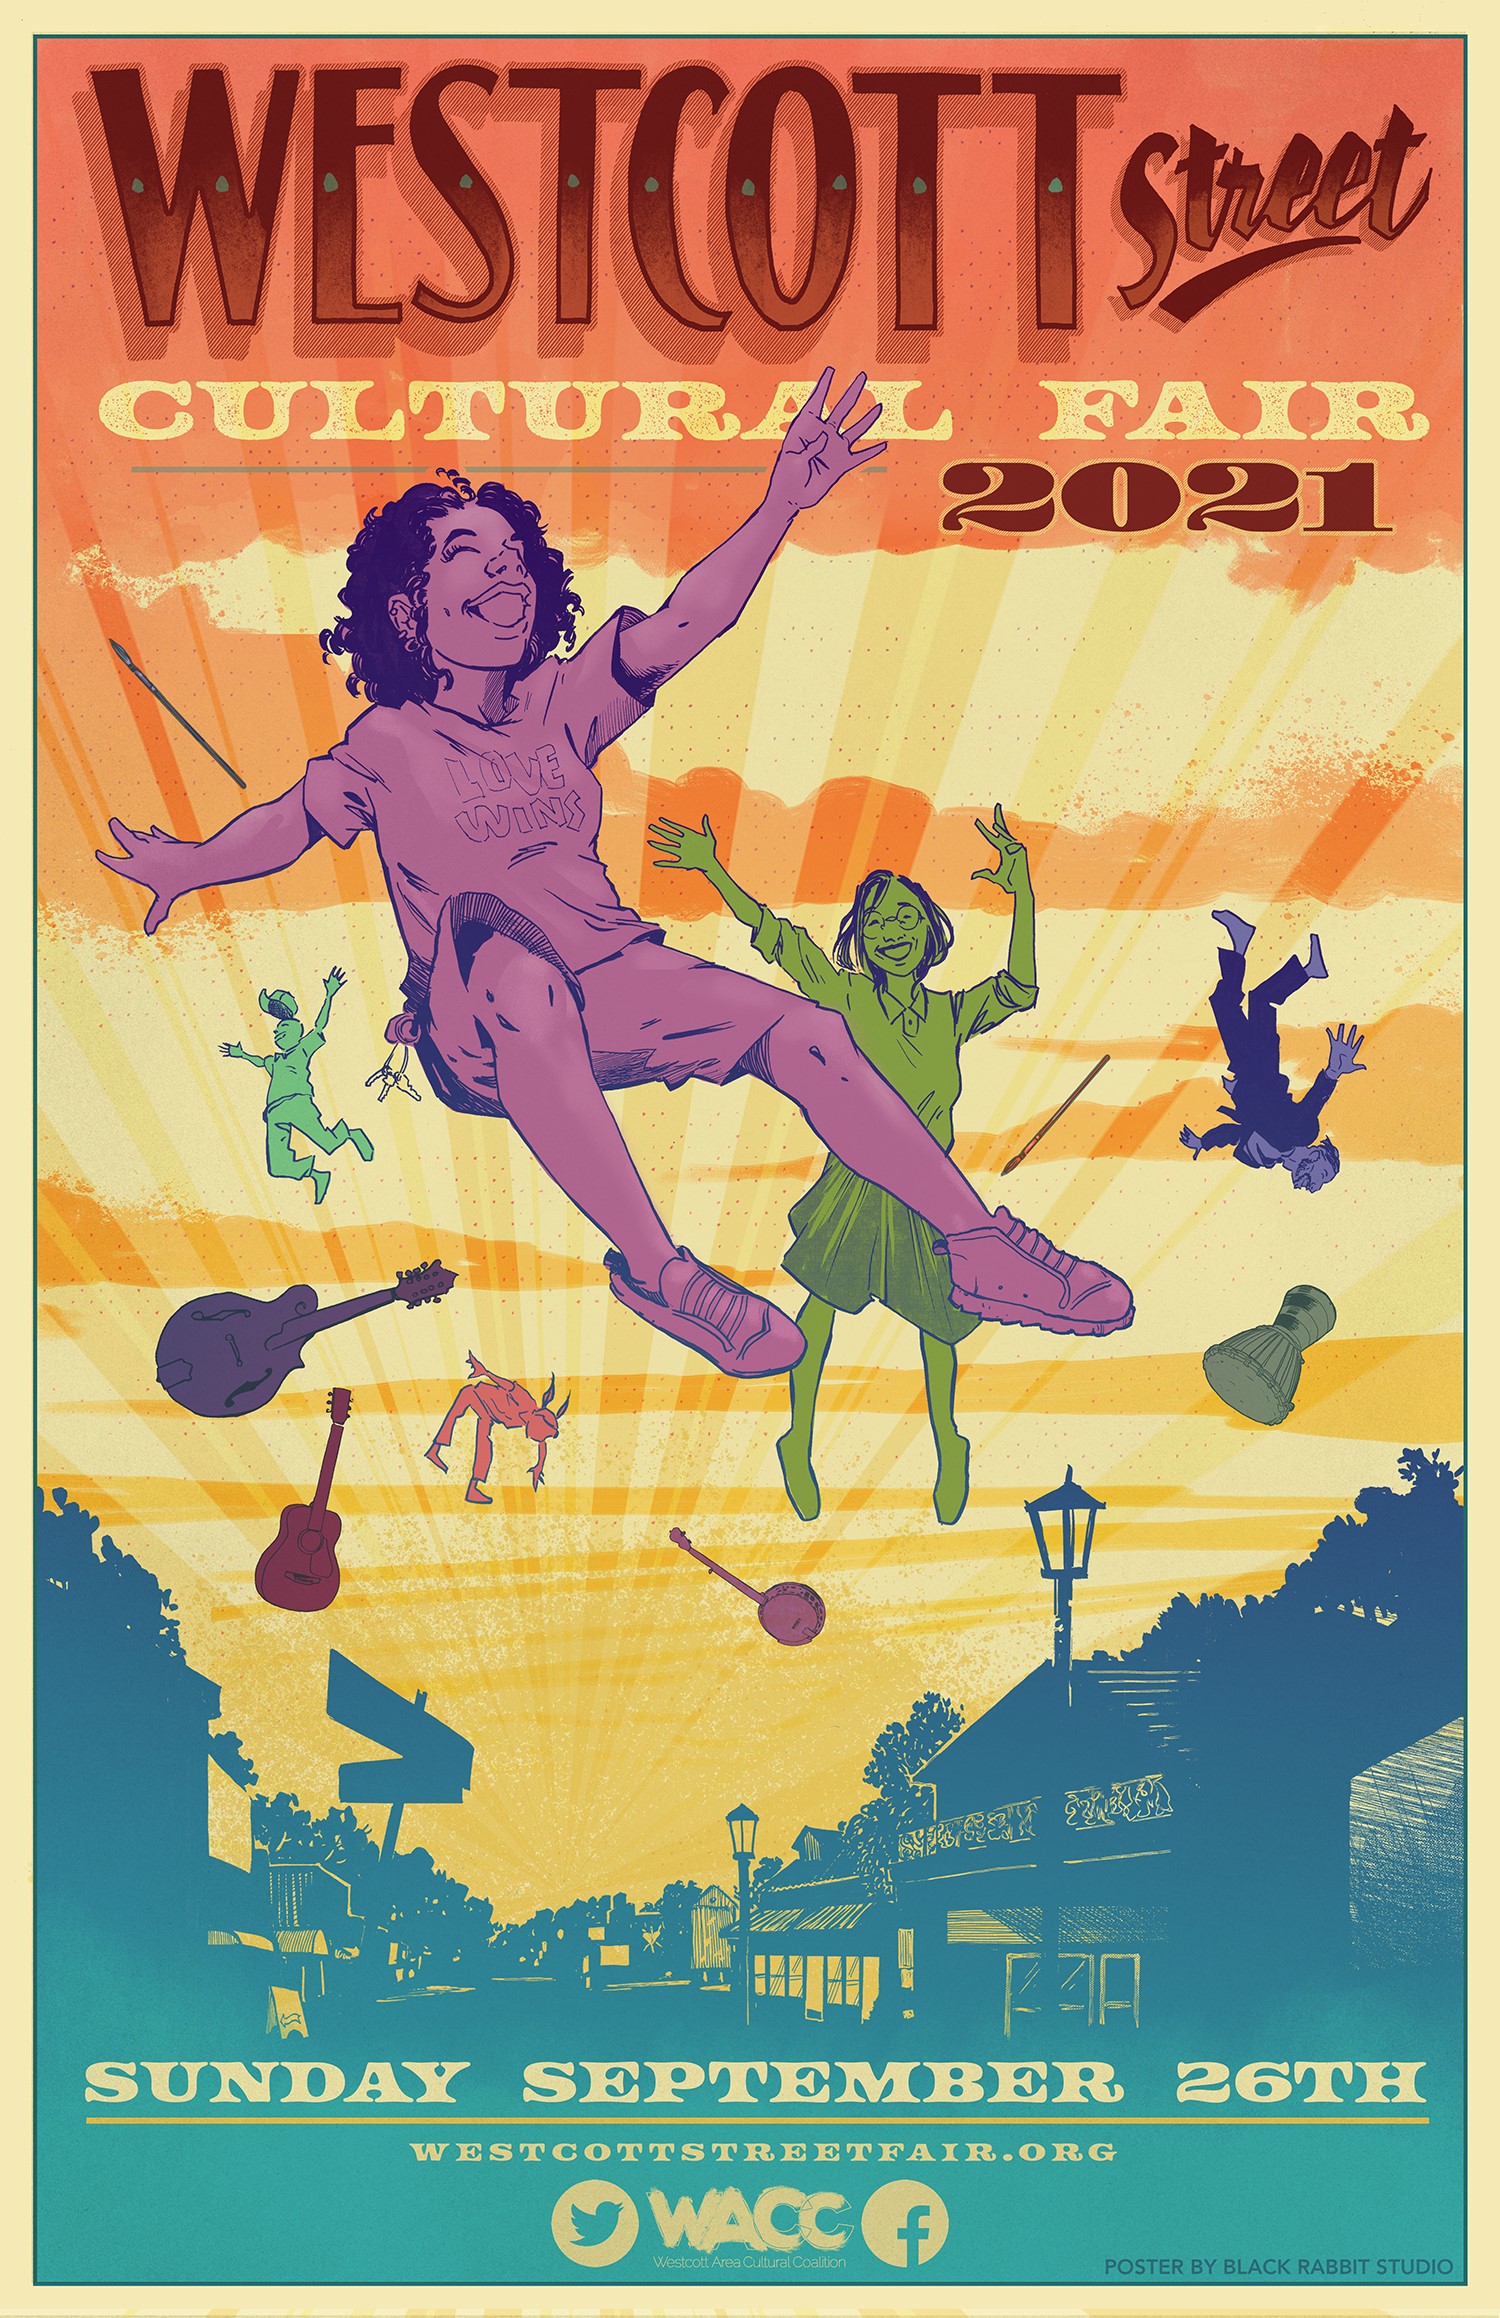 Westcott Street Fair poster, coloful cartoon with people and floating instruments in the air